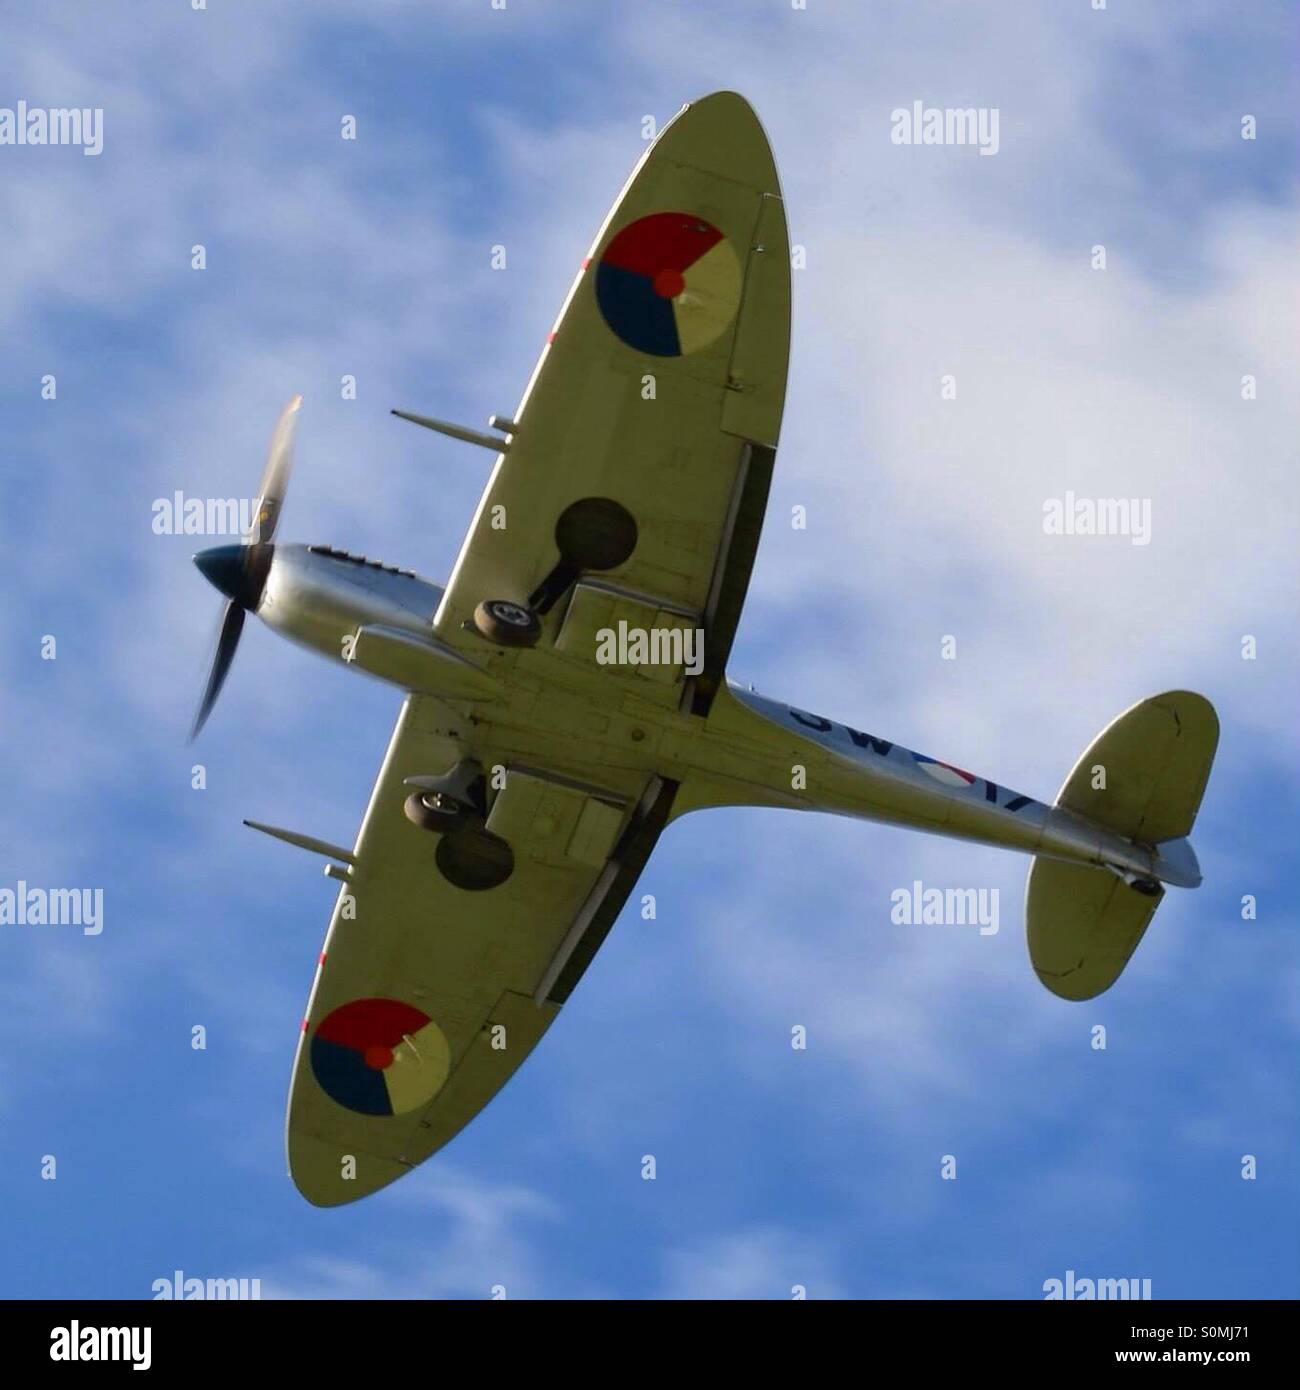 World War Two British Spitfire fighter aircraft with its landing gear down. Stock Photo